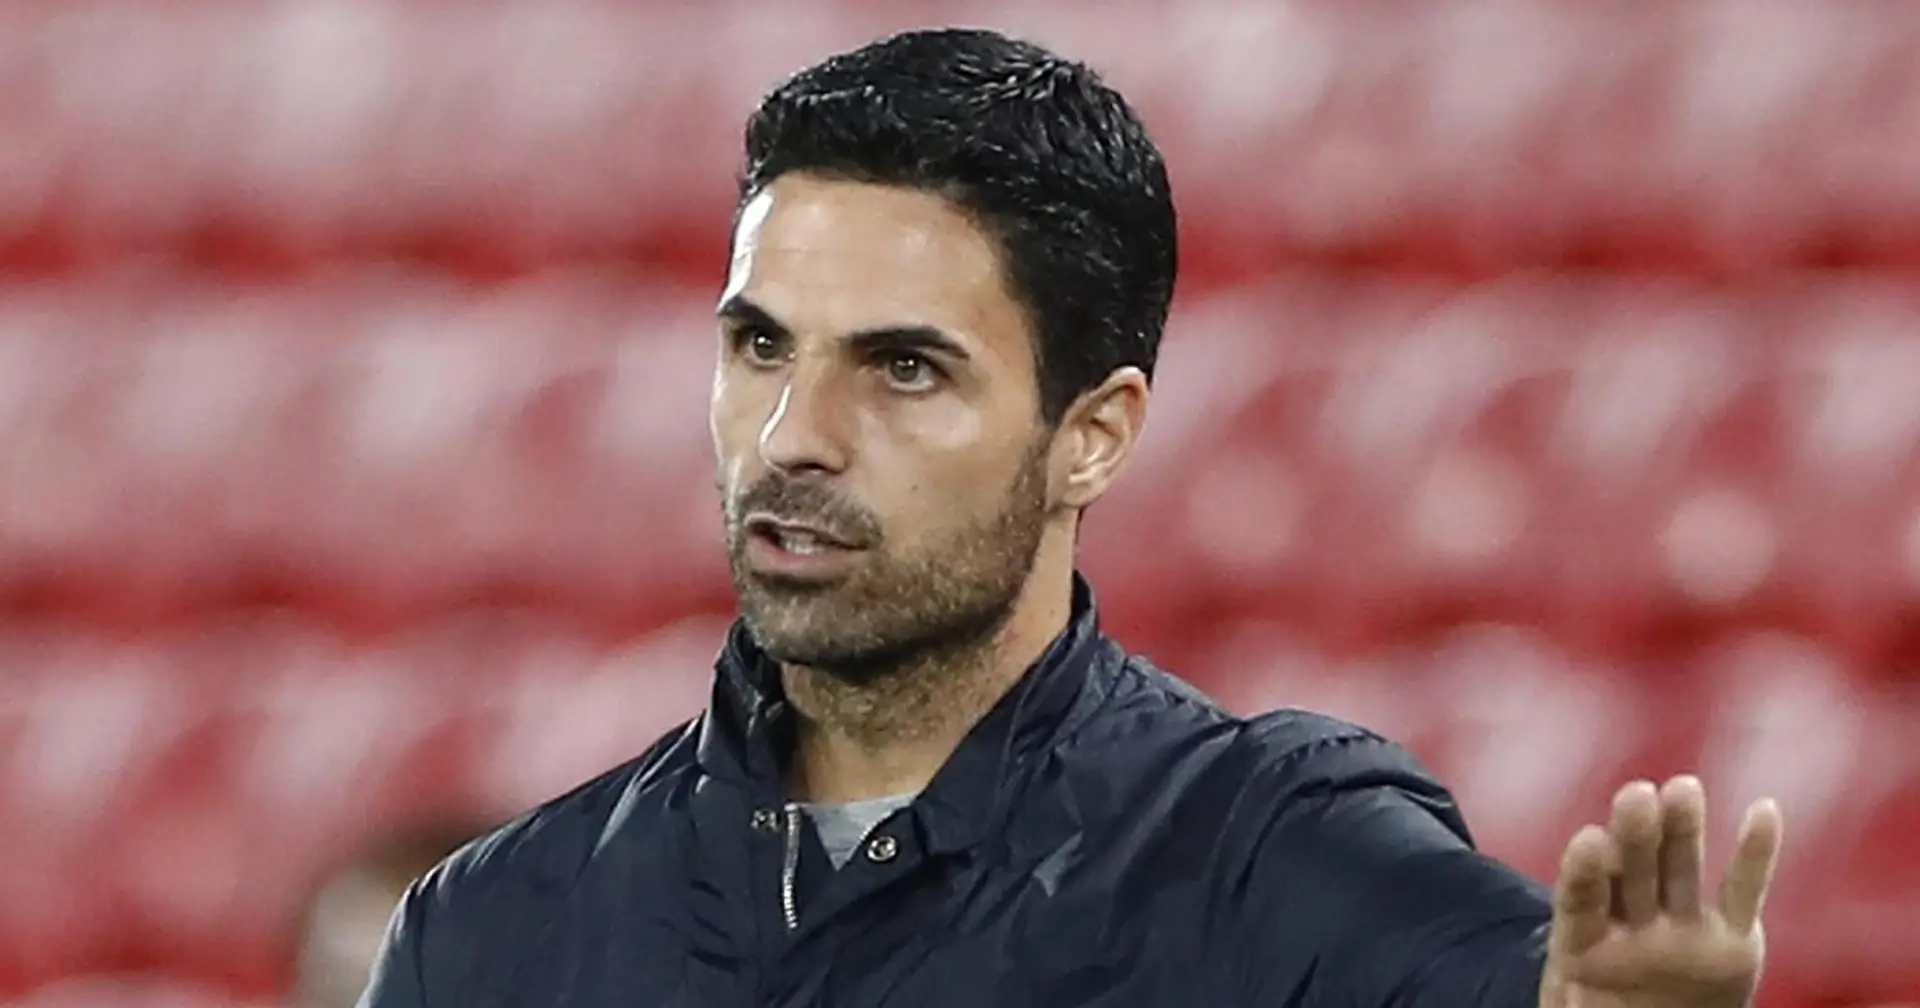 International break fatigue and 2 more reasons for Arteta to rotate squad ahead of hectic schedule